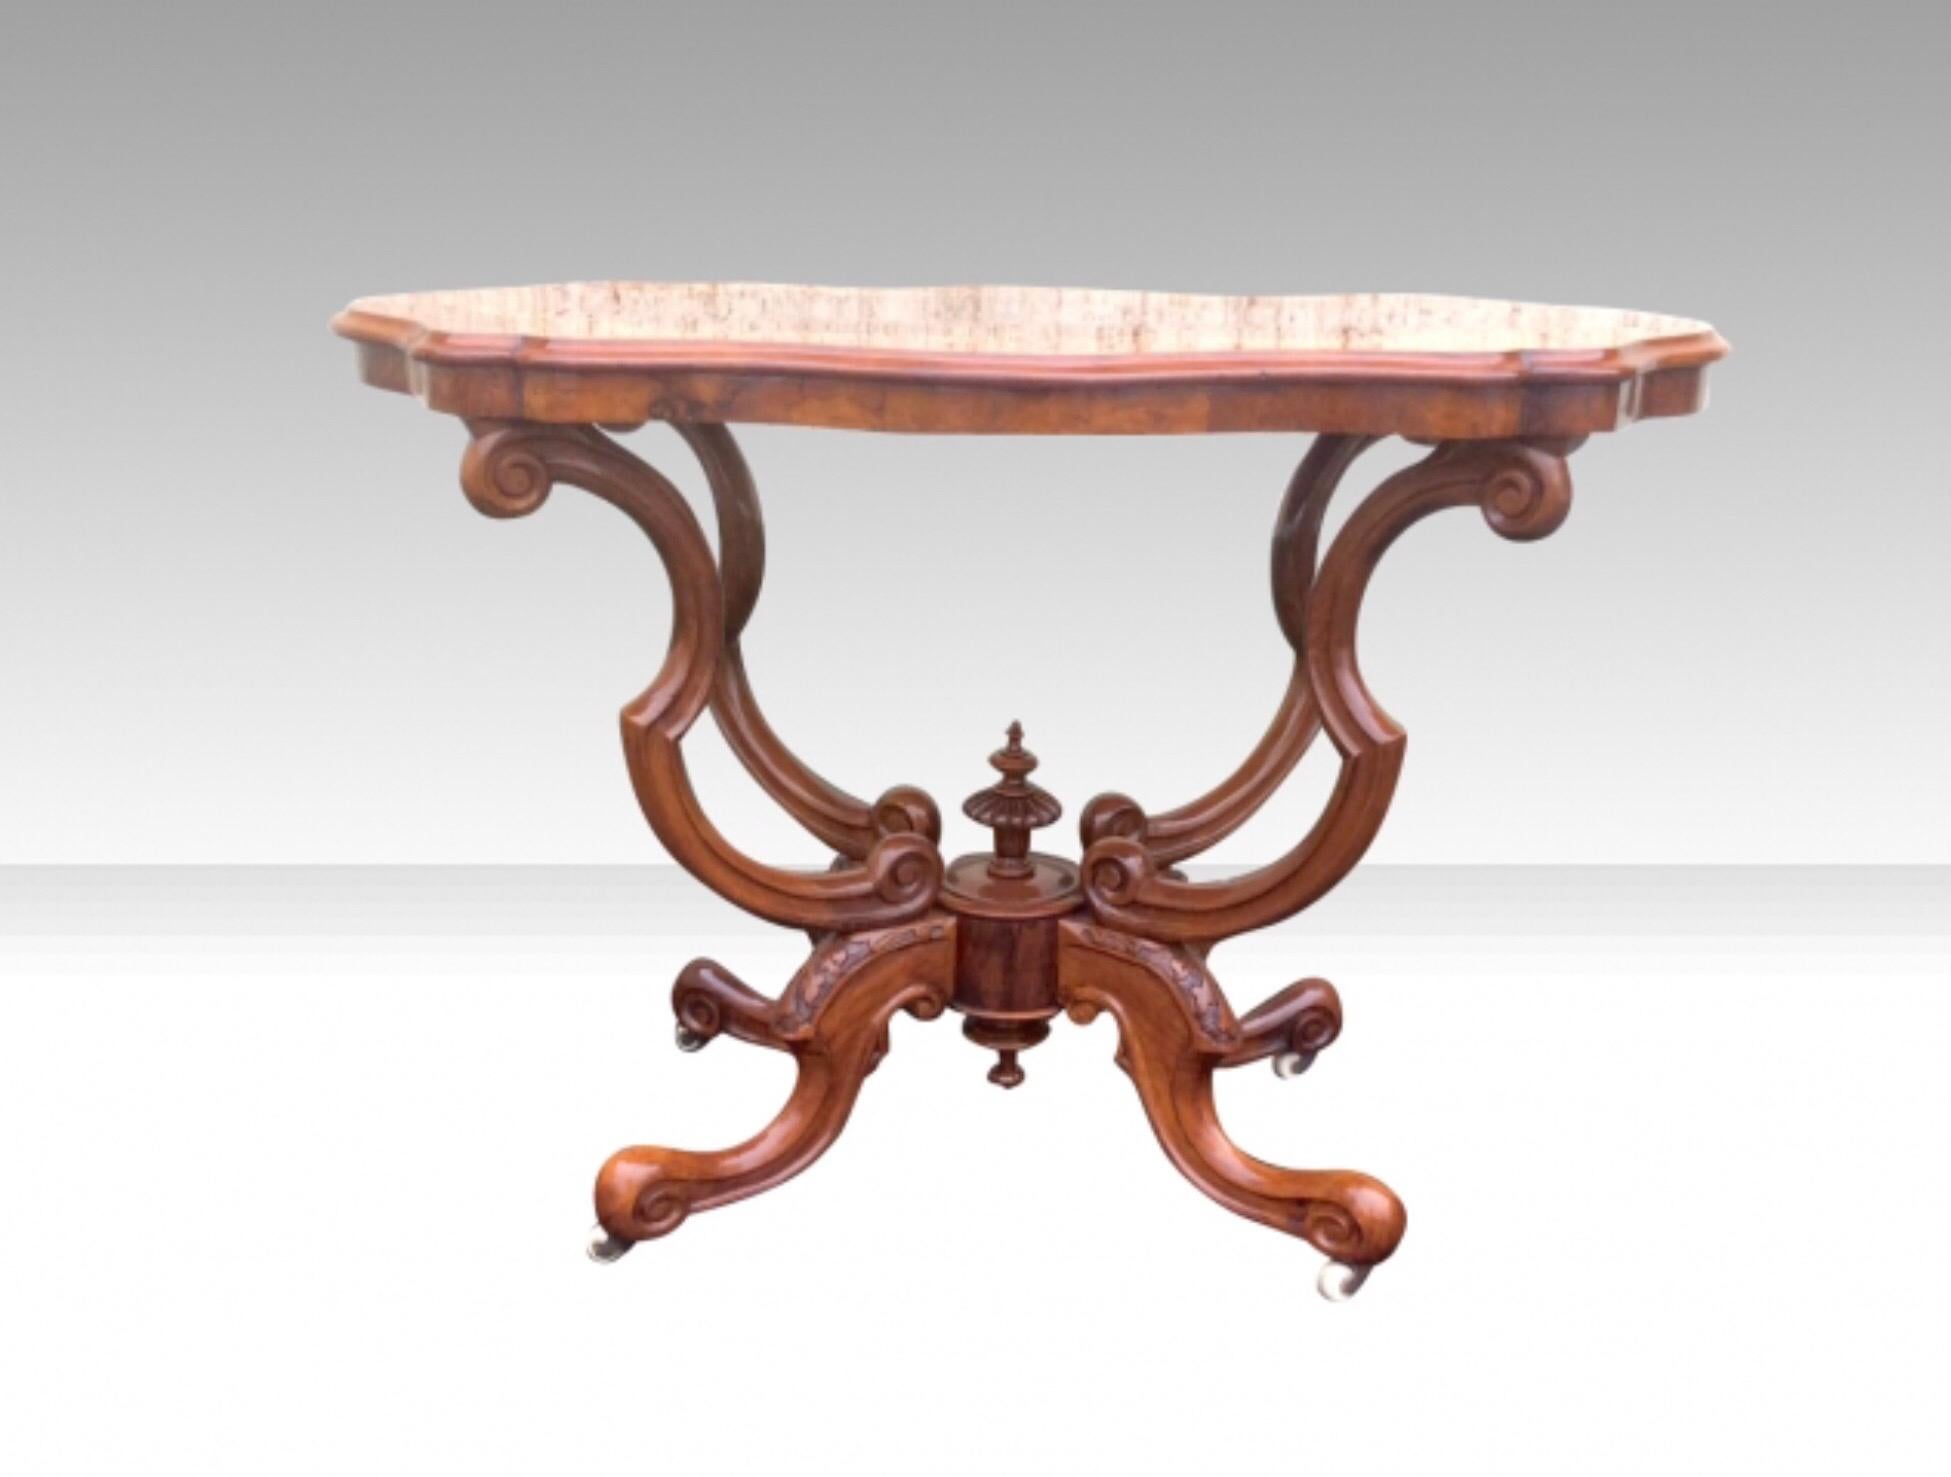 Magnificent antique marquetry inlaid burr walnut window table, occasional table with cradle base and shaped oval top
Circa 1860
Measures: 41 ins. wide x 24 ins. deep x 29 ins high.